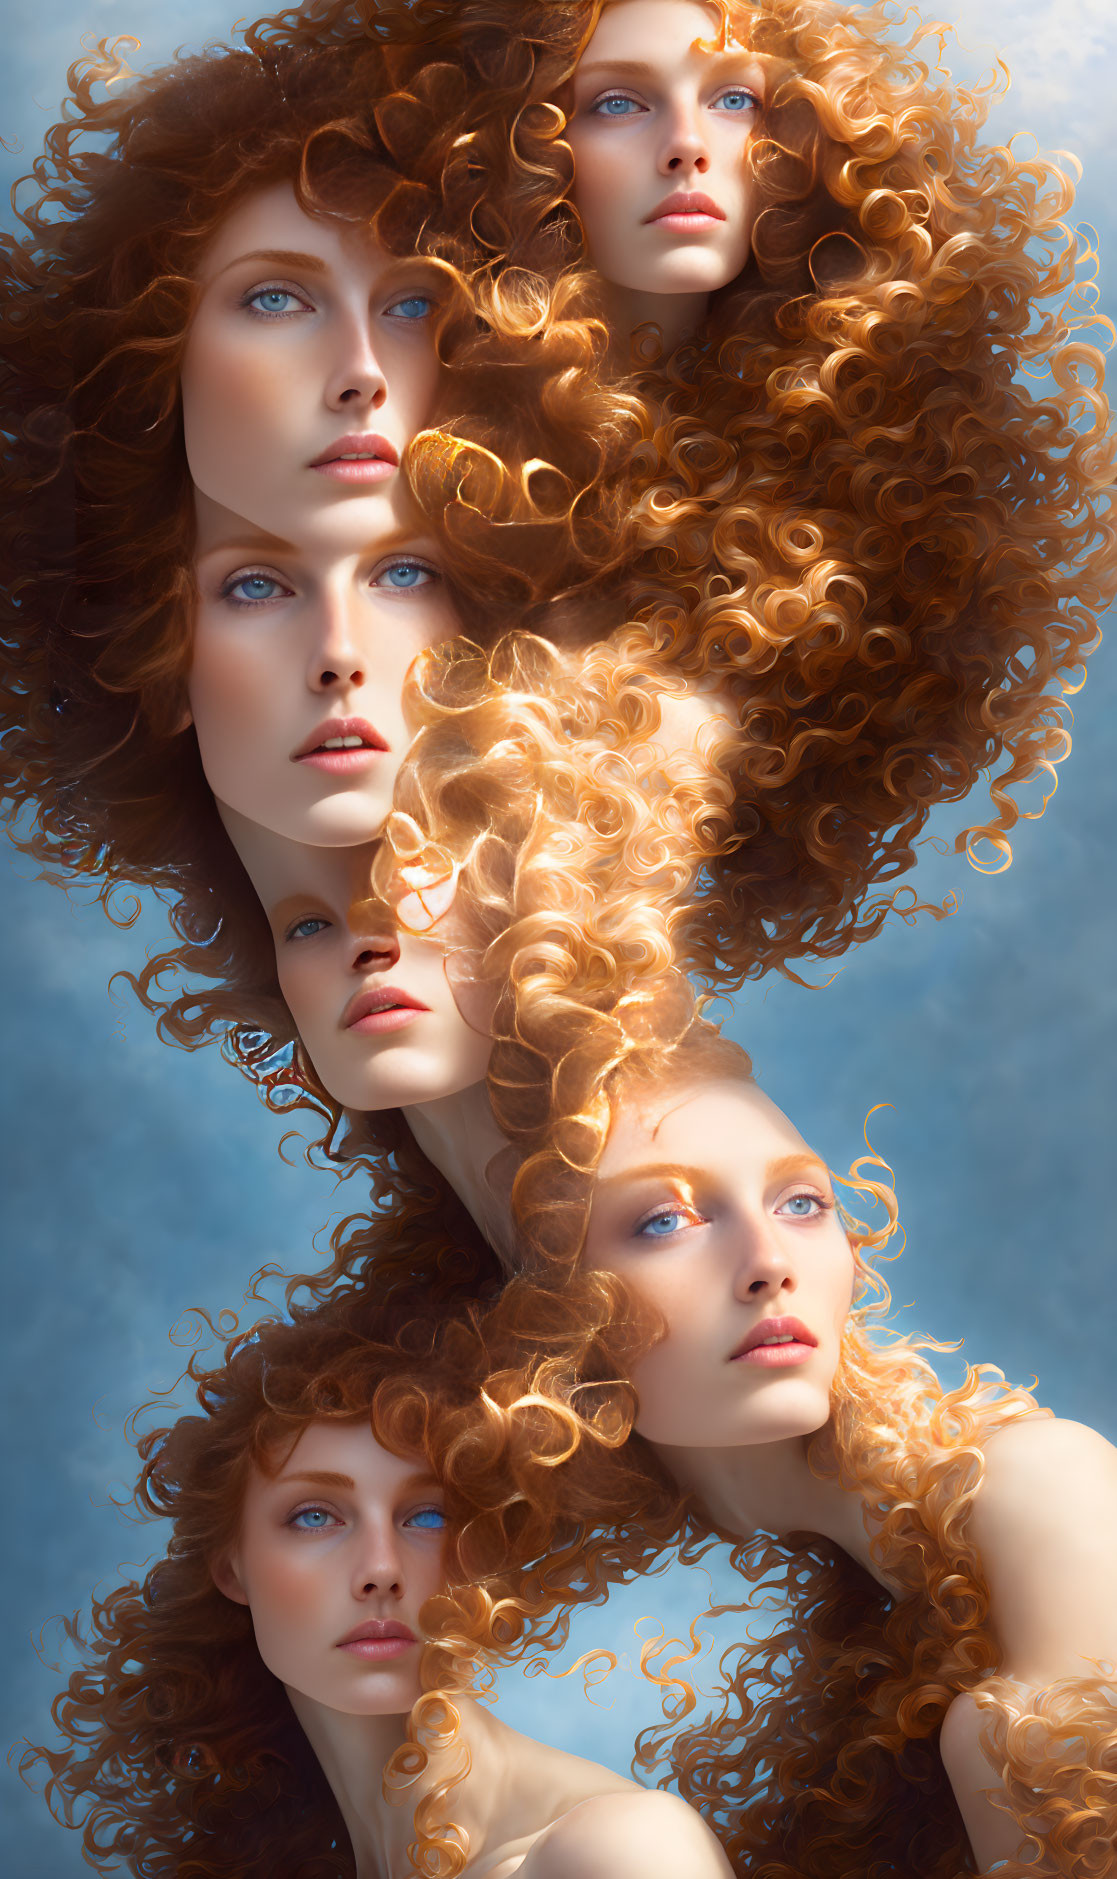 Group of Women with Red Curls and Blue Eyes on Soft Blue Background